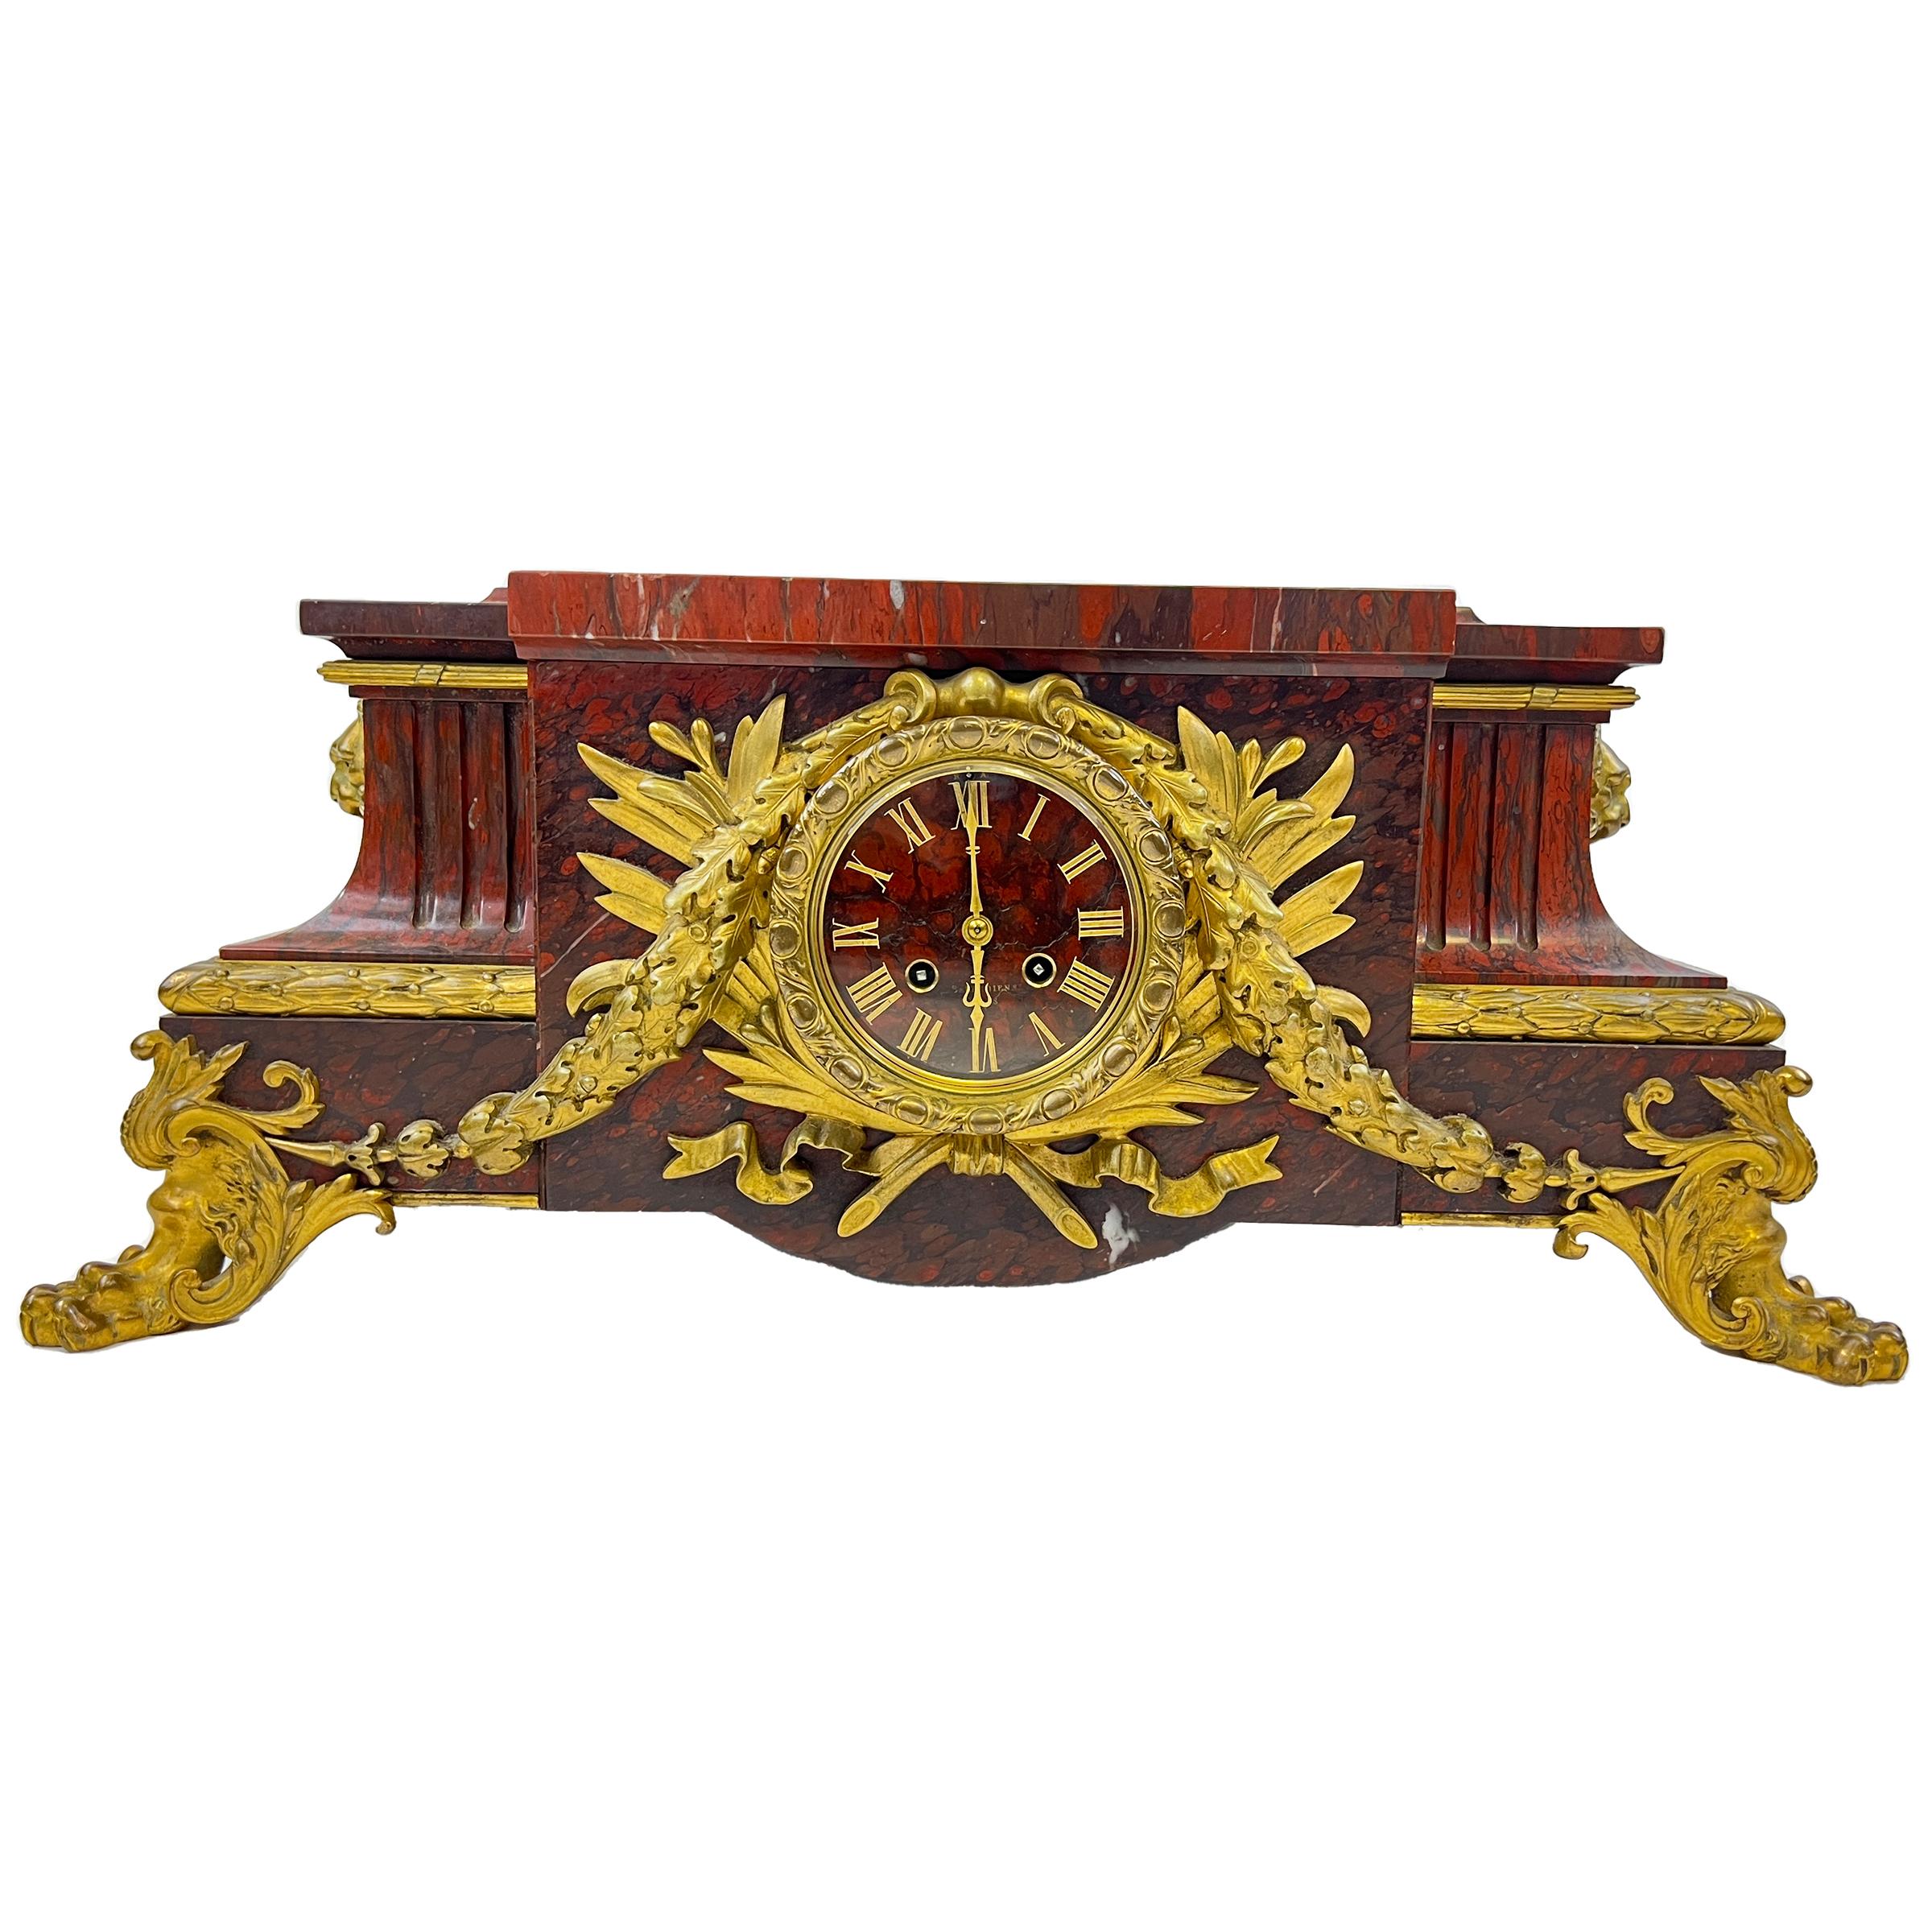 A fine example of Parisian Belle Époque craftsmanship, this monumental mantel clock made of Griotte marble and gilt-bronze, The red round dial is made of marble with roman numerals and signed 